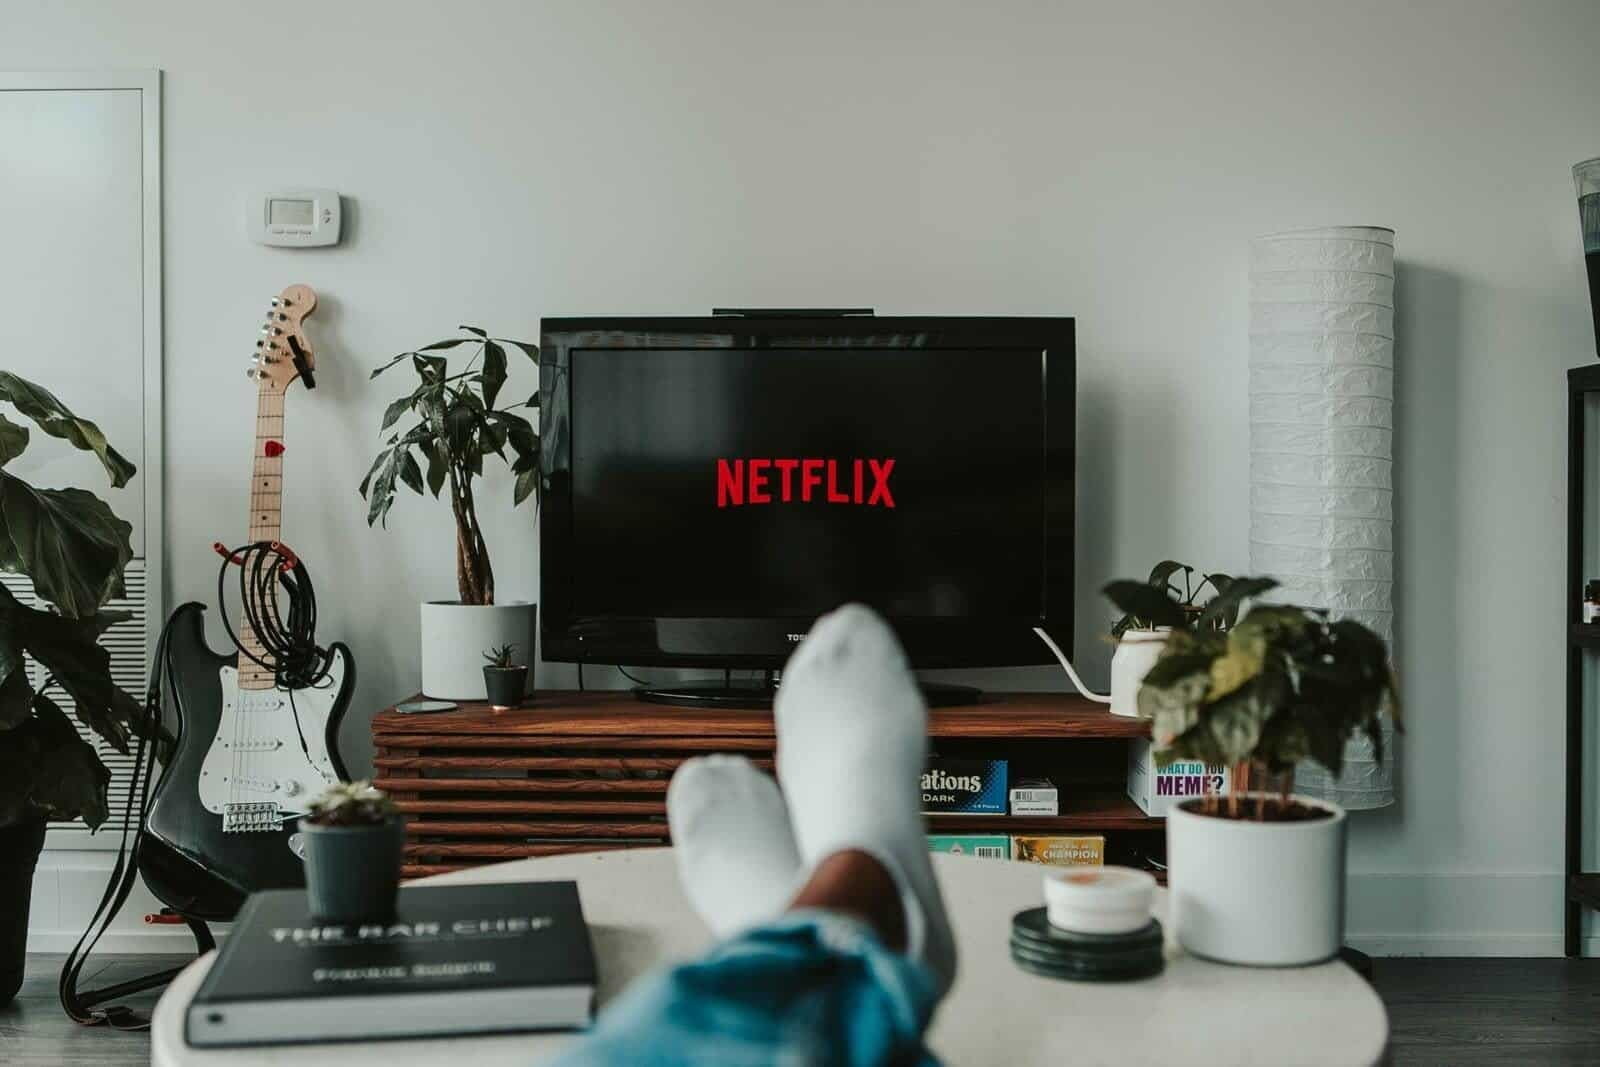 The best fibre internet packages for streaming on Netflix